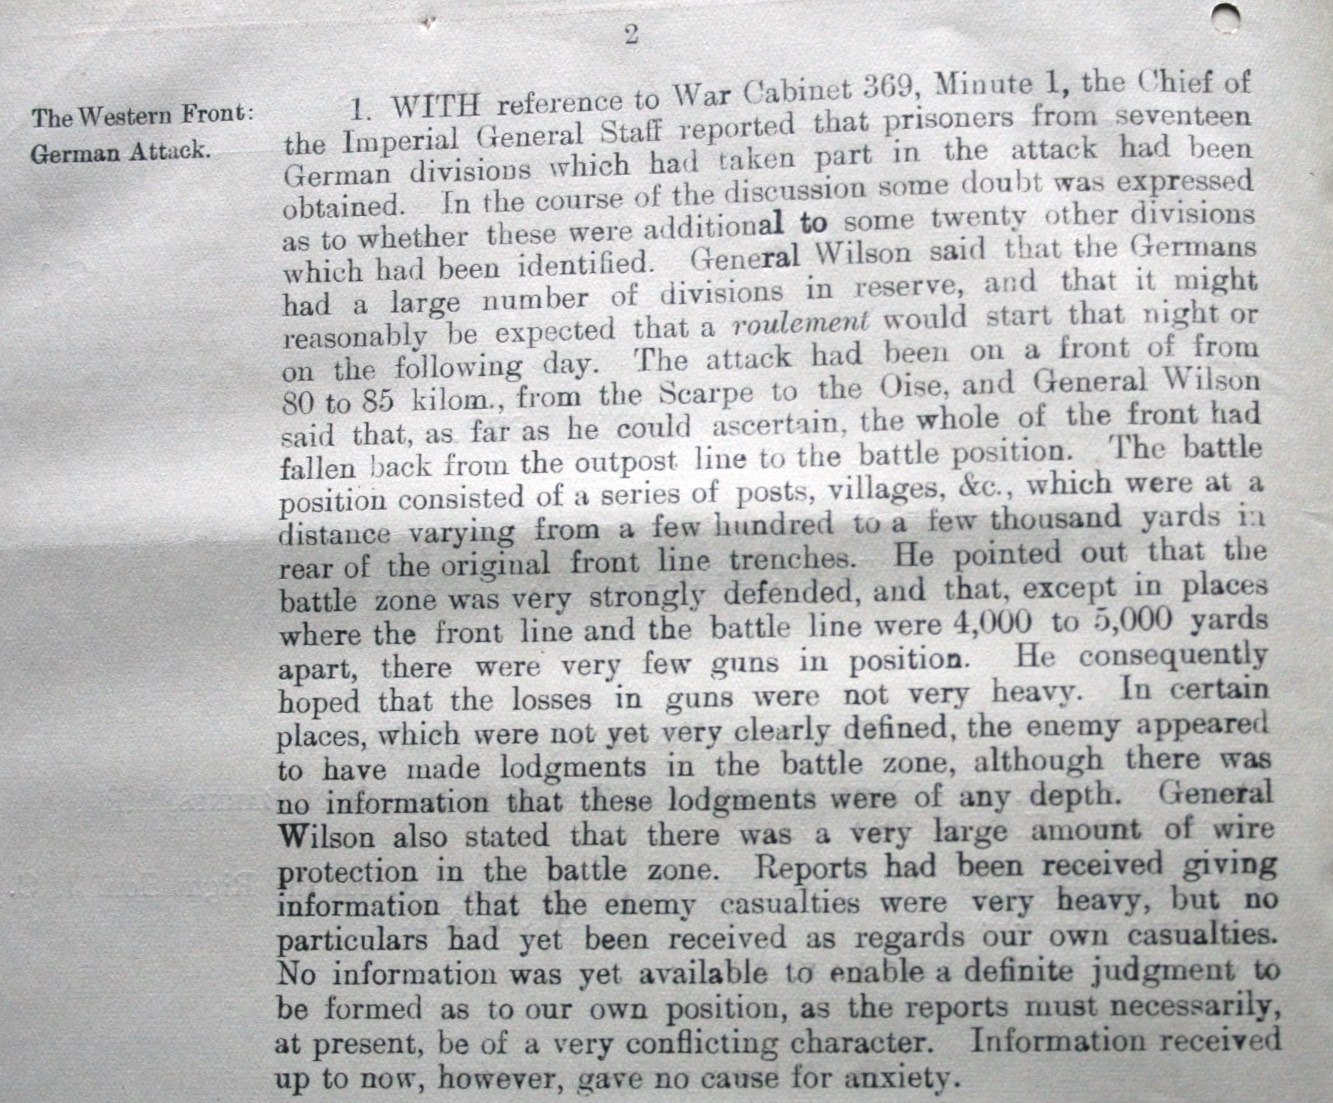 War Cabinet Meeting 370, p.2, 22 March 1918